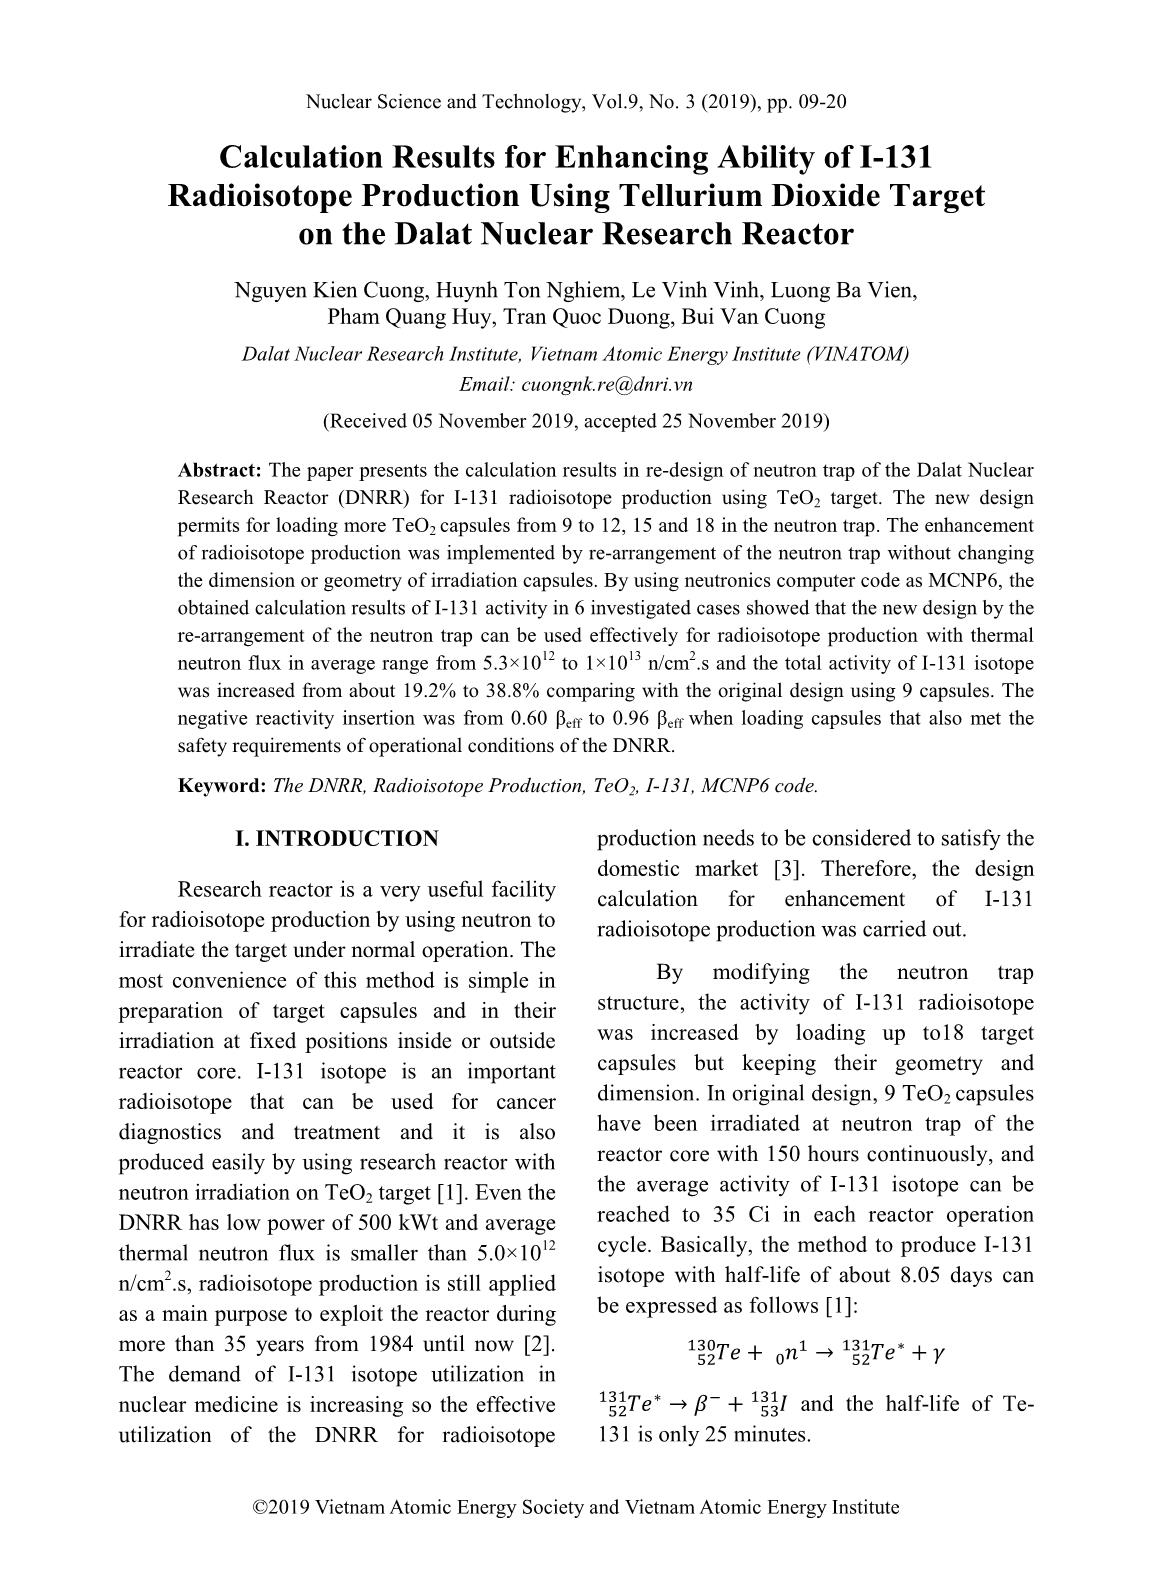 Calculation results for enhancing ability of I-131 radioisotope production using tellurium dioxide target on the dalat nuclear research reactor trang 1